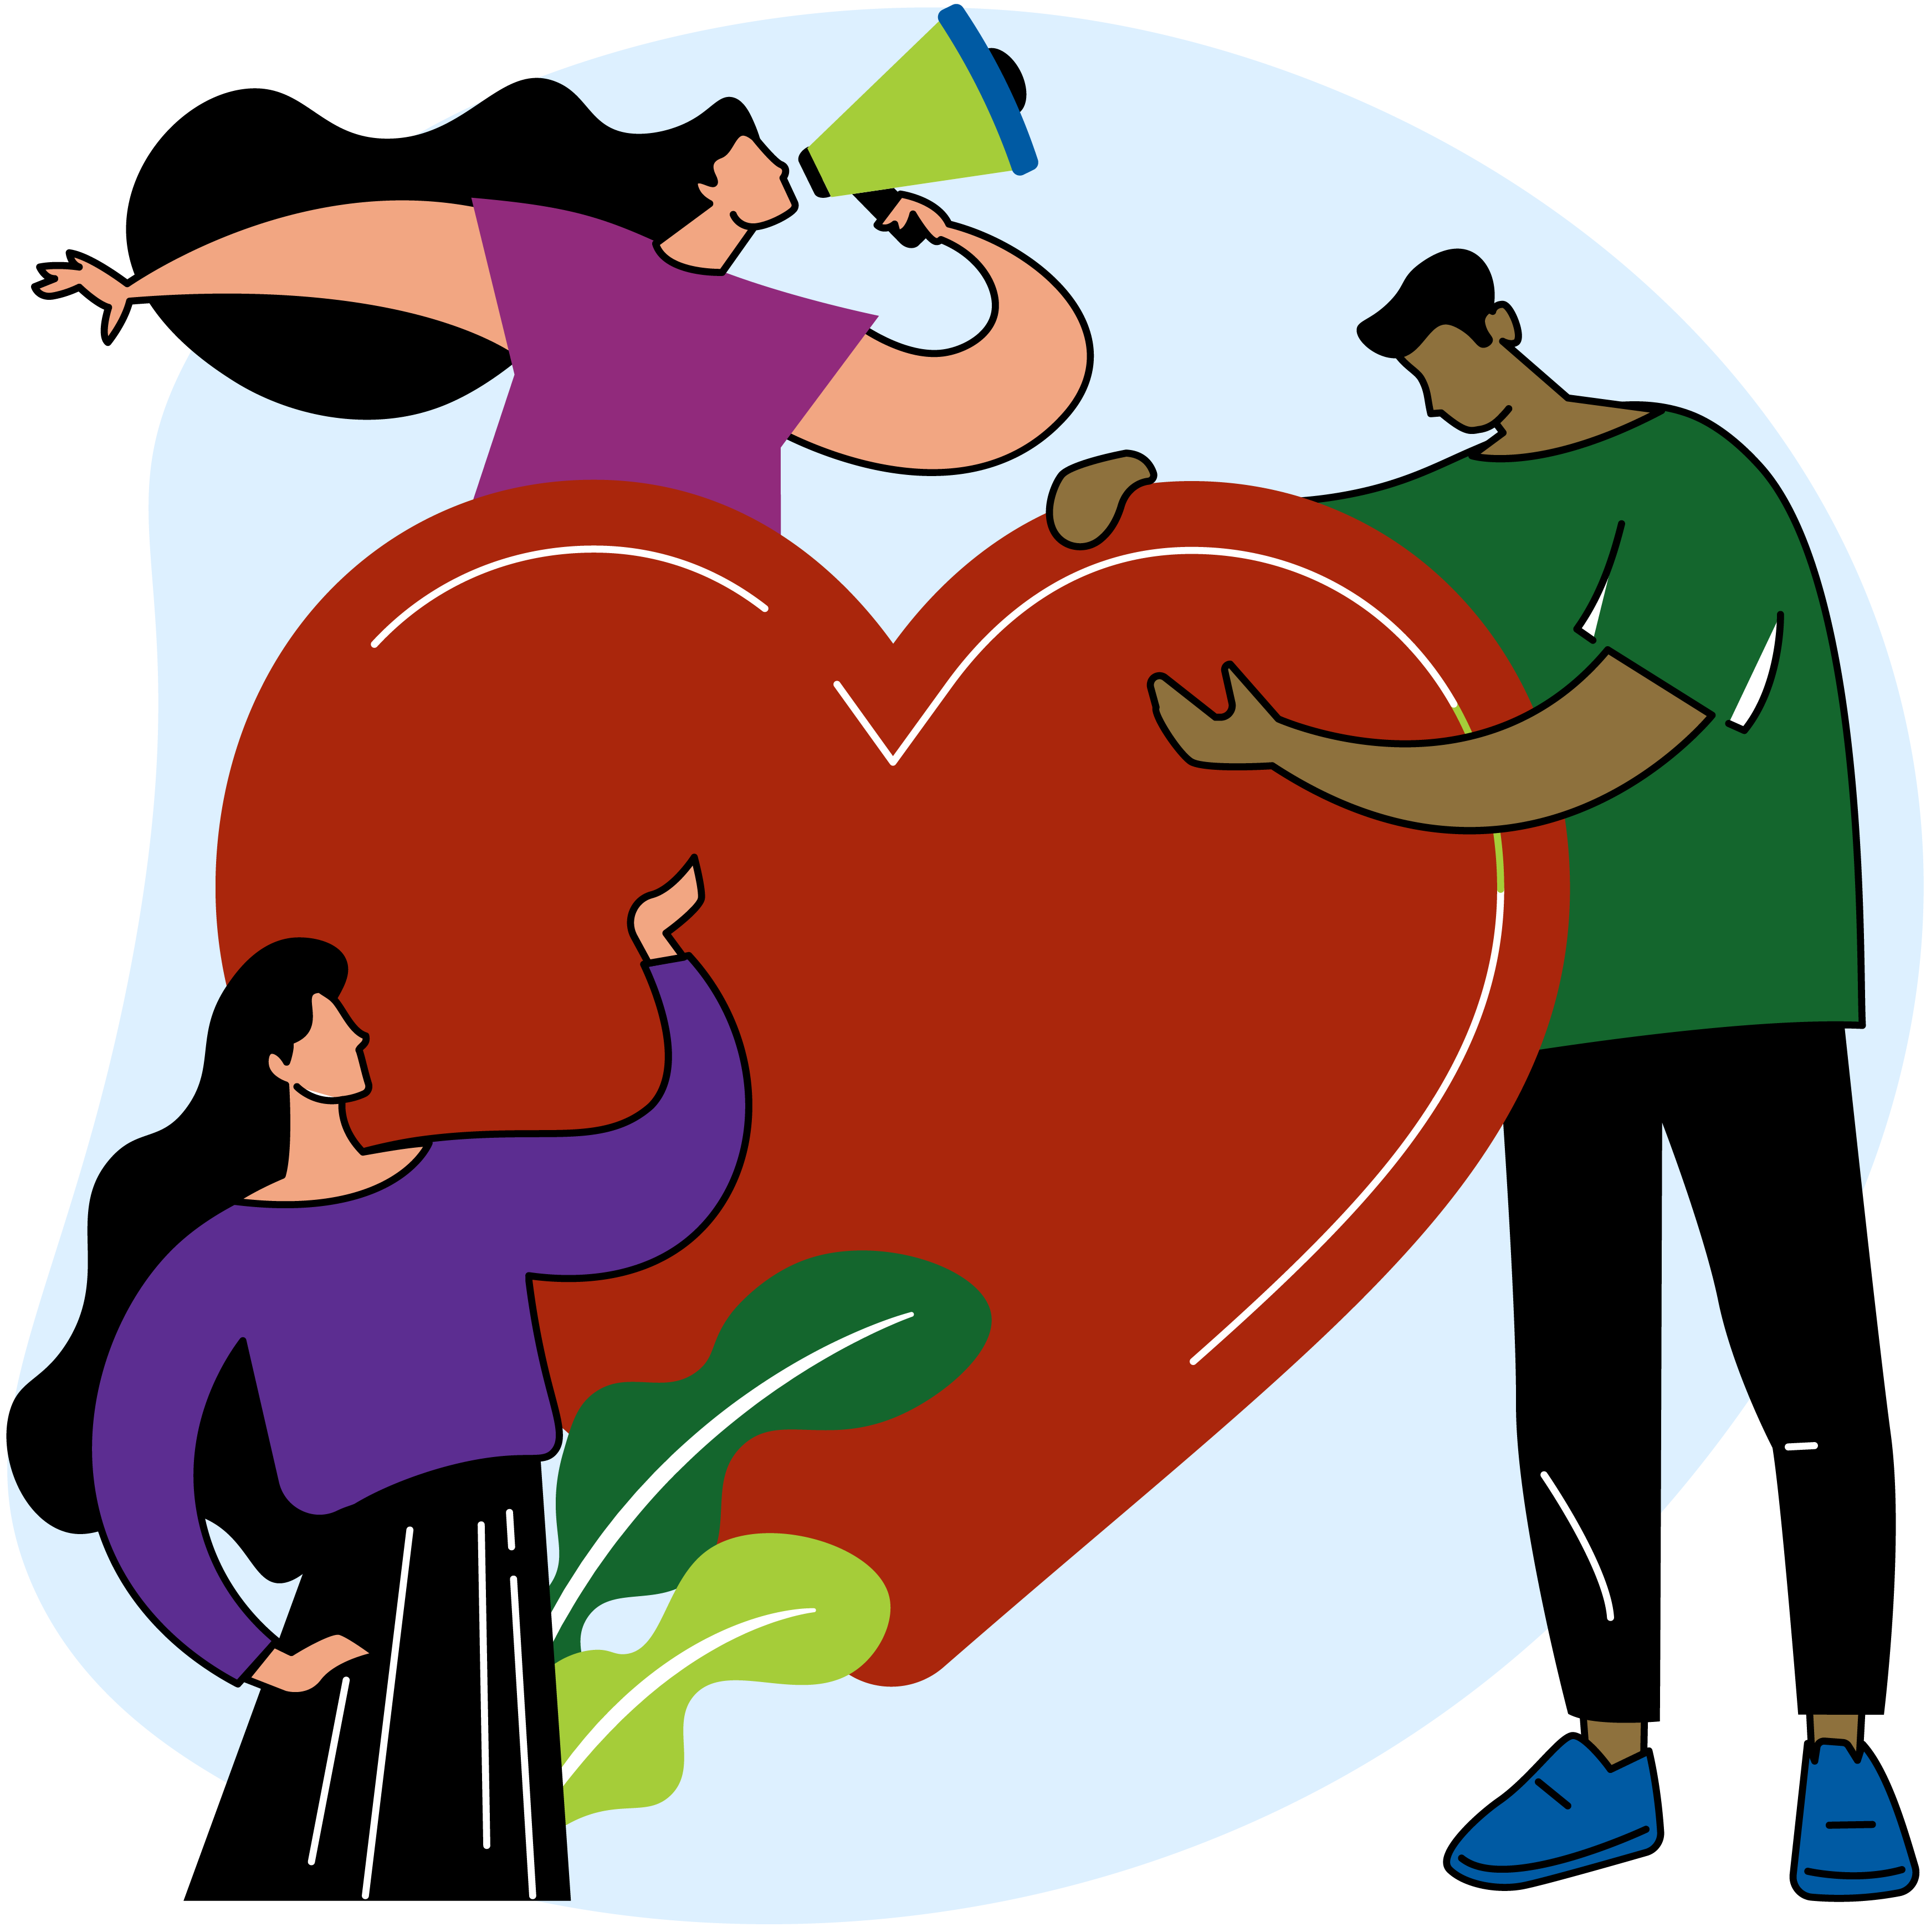 Illustration of three people, including one with a loudhailer, standing around a large heart shape.